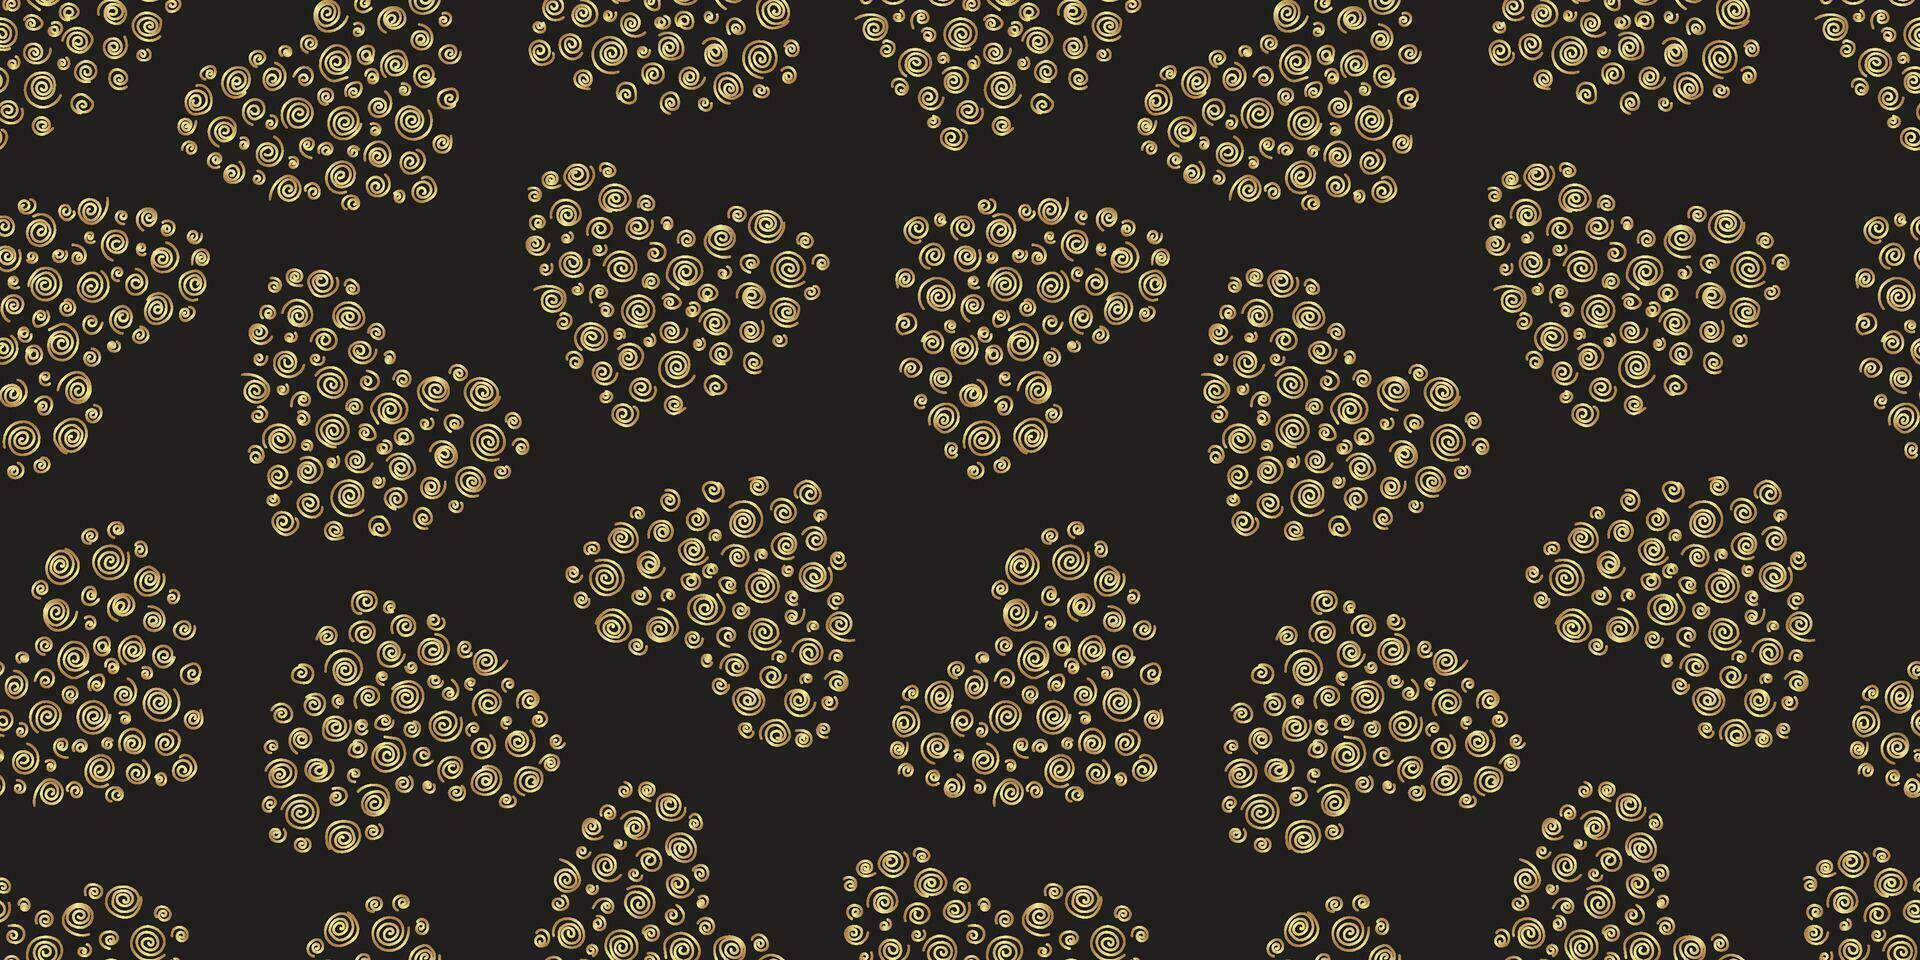 Golden hearts on black background seamless pattern vector illustration. Luxurious elegant pattern. Hand drawn decorative gold heart for gift packaging, wrapping paper, textile. Valentines day.